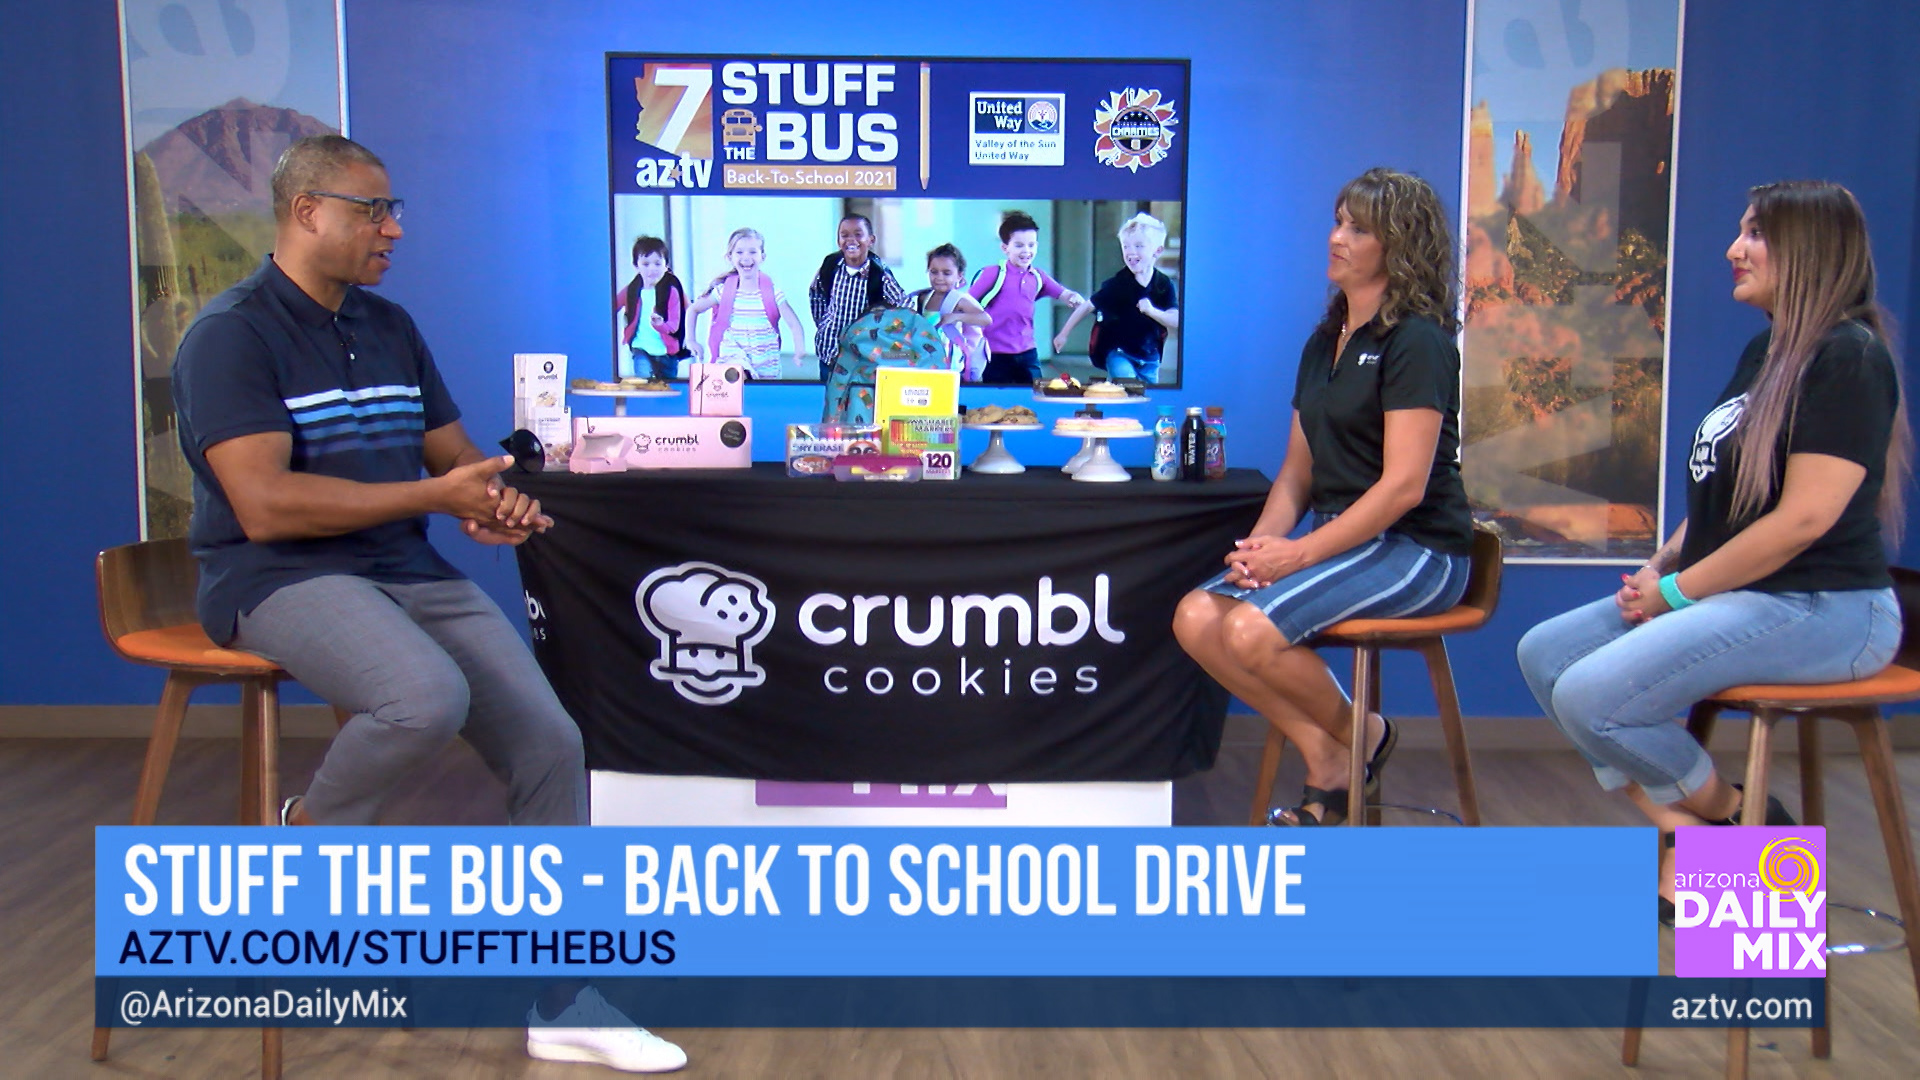 Crumbl Cookies is Helping to Stuff the Bus in 2021!